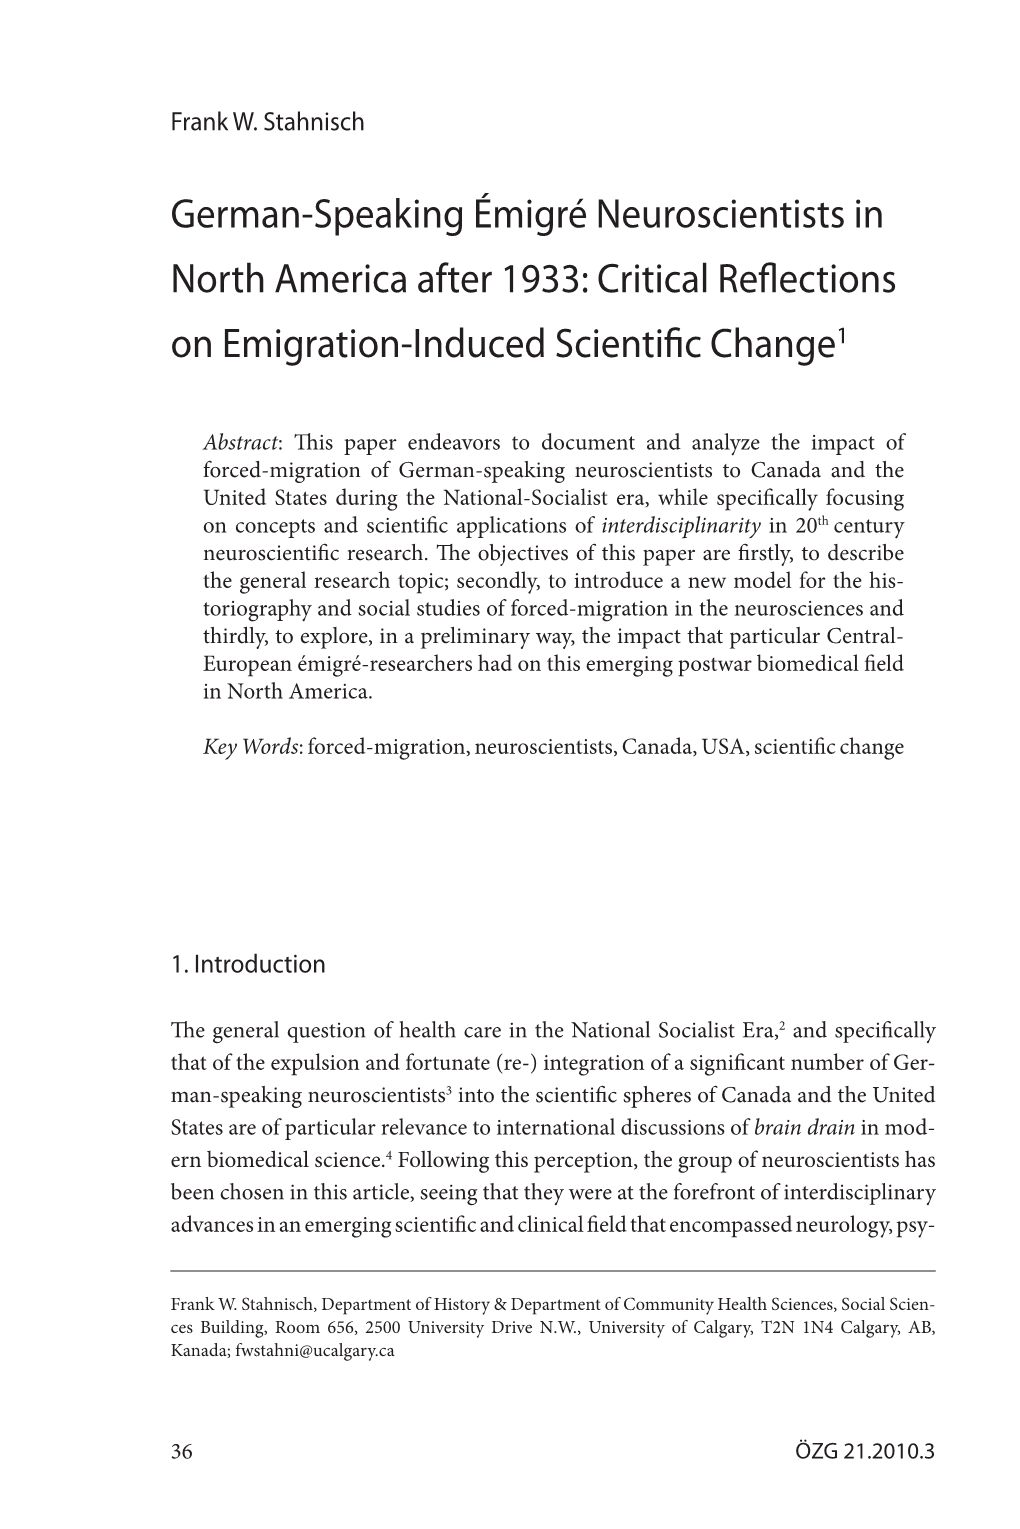 German-Speaking Émigré Neuroscientists in North America After 1933: Critical Reflections on Emigration-Induced Scientific Change1